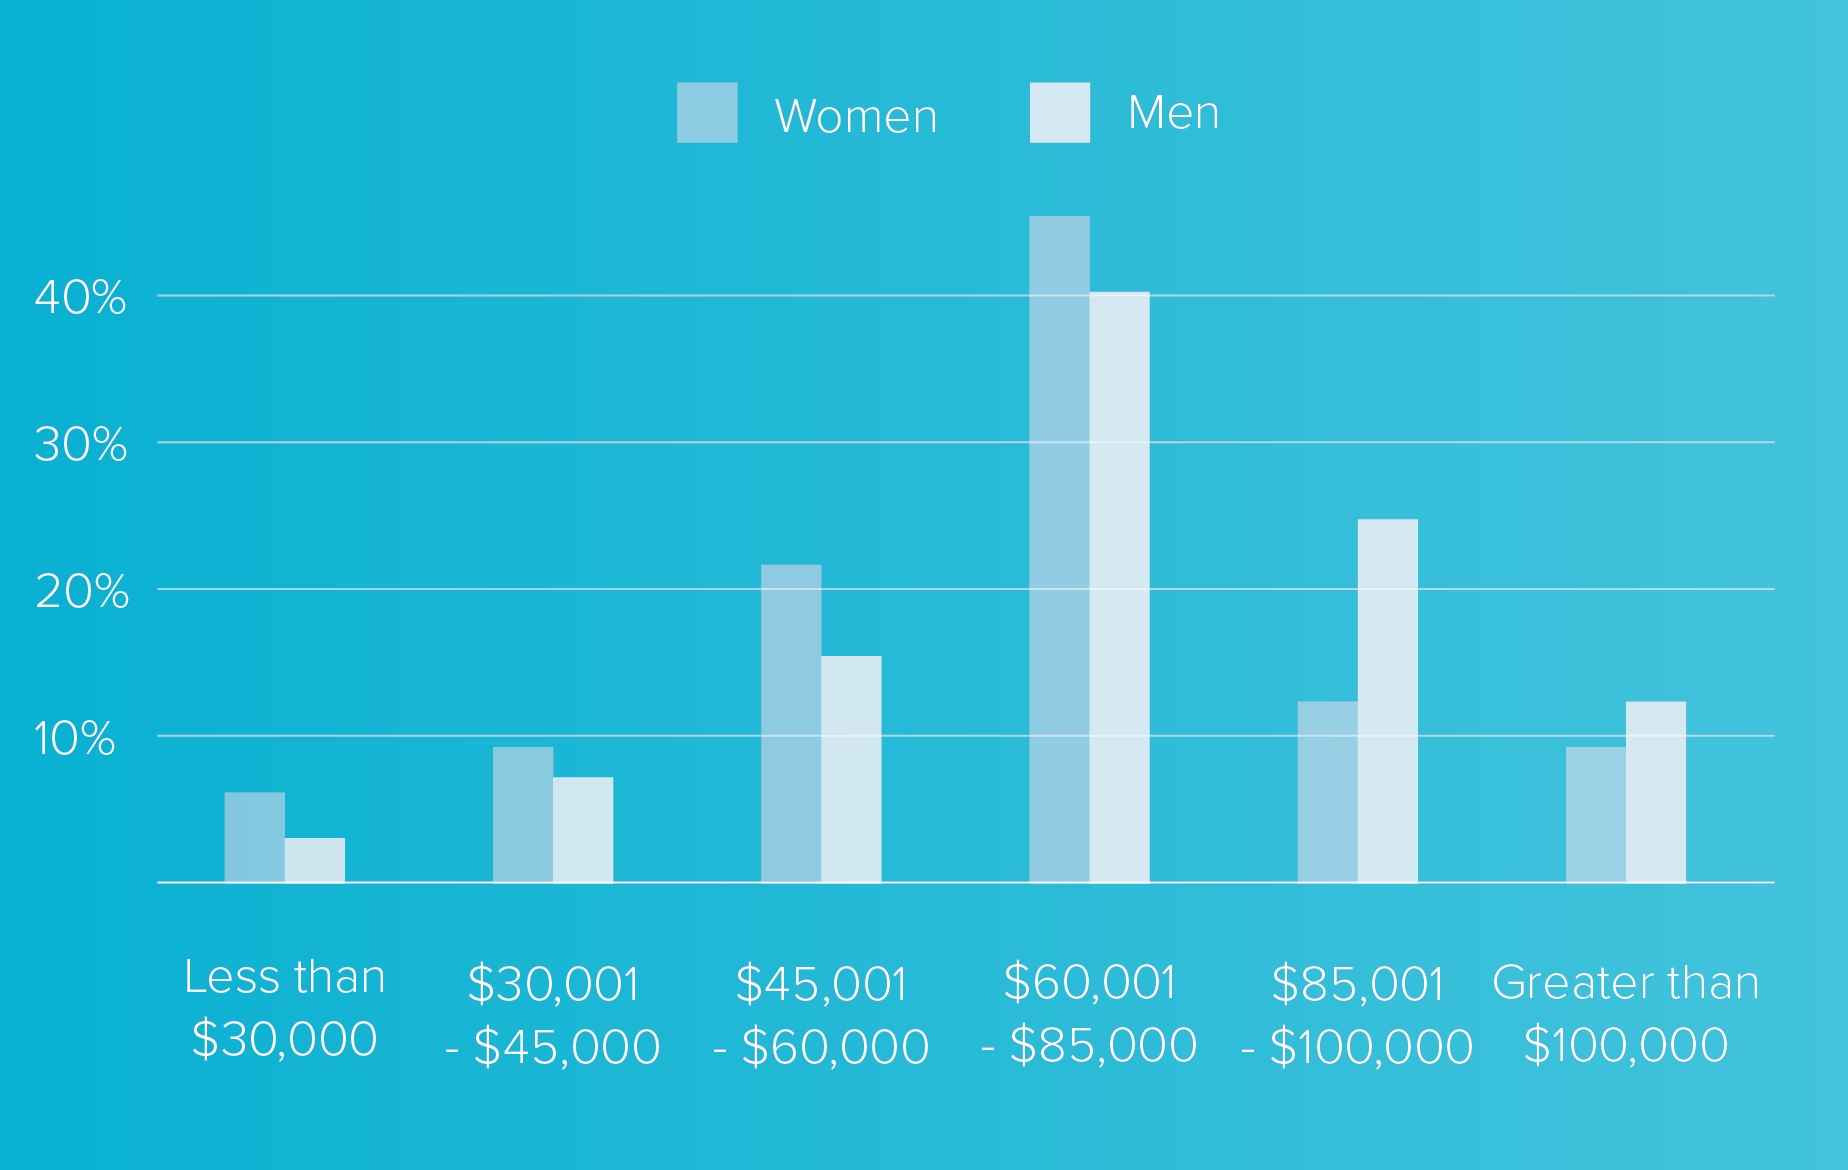 A chart showing that women are more likely than men to expect salary ranges under $85,000 and men are more likely than women to expect salaries greater than $85,000